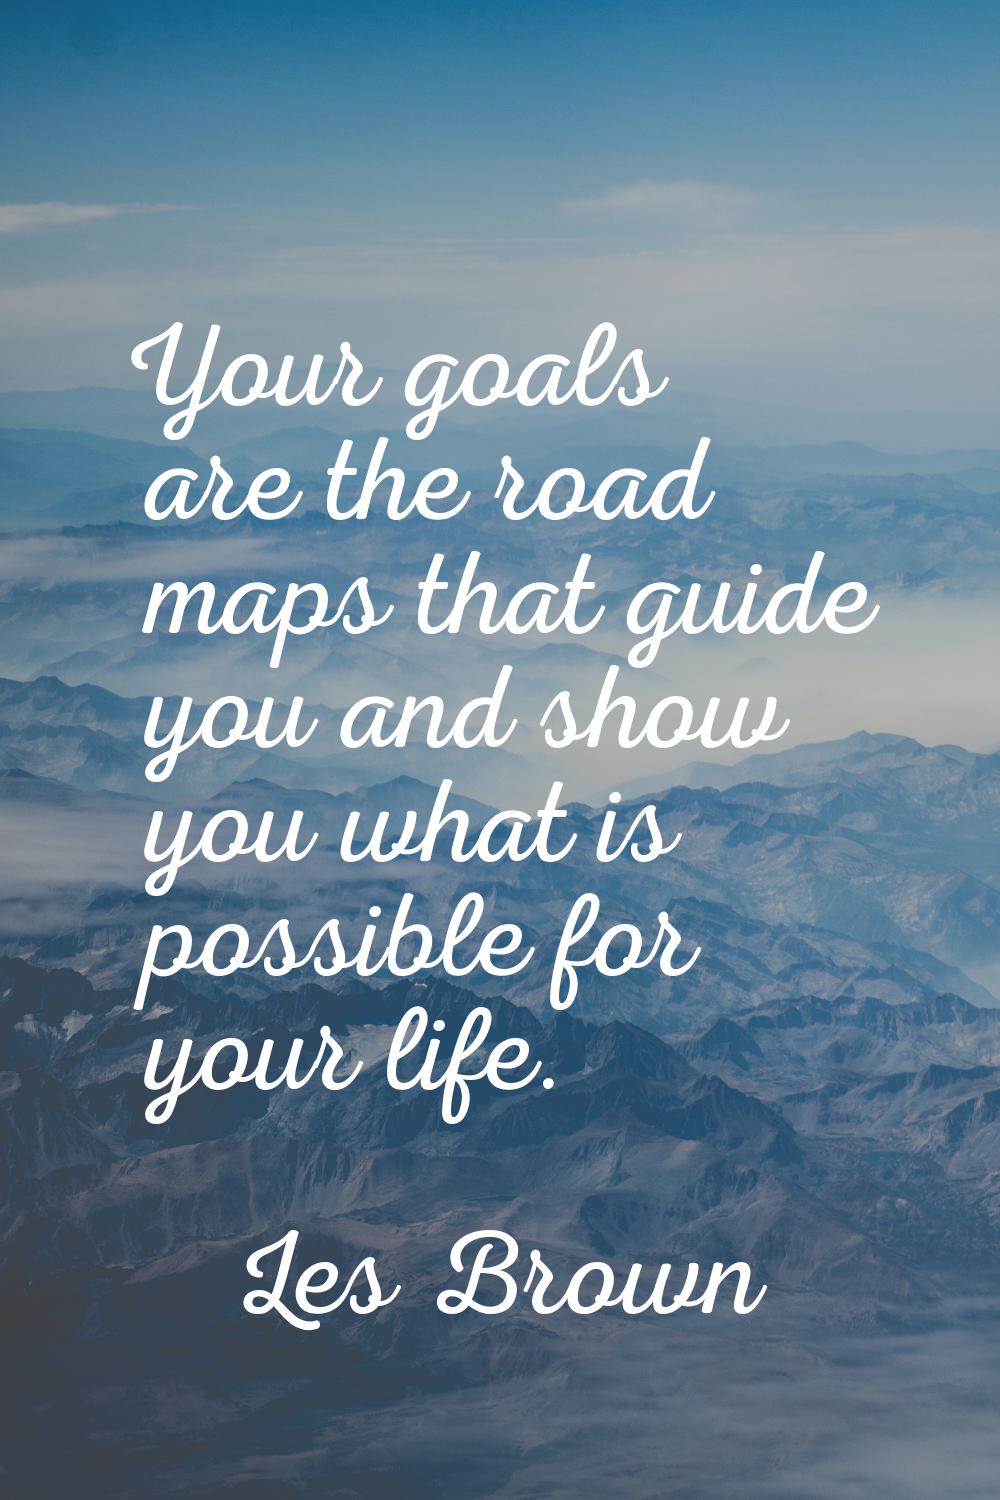 Your goals are the road maps that guide you and show you what is possible for your life.